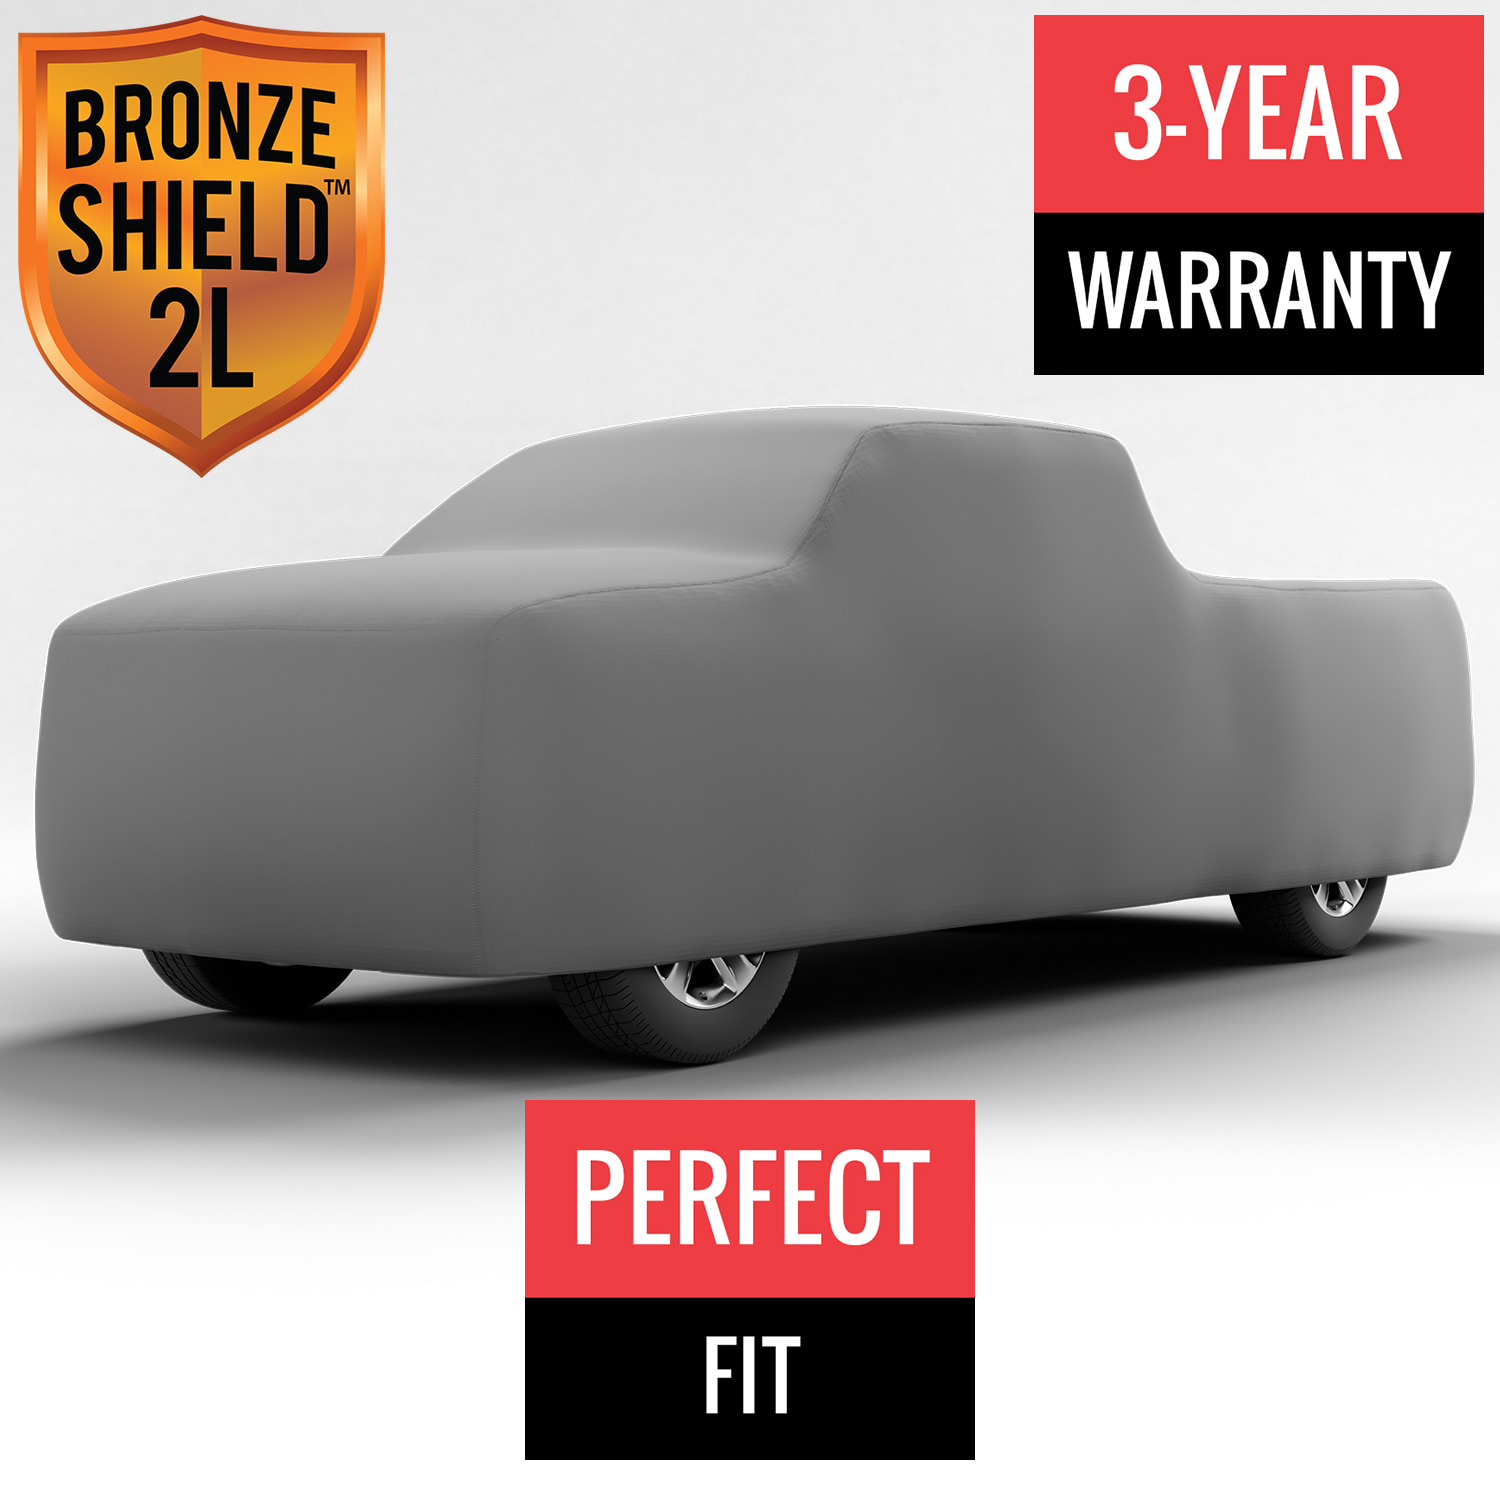 Bronze Shield 2L - Car Cover for GMC C1500 1992 Extended Cab Pickup 8.0 Feet Bed